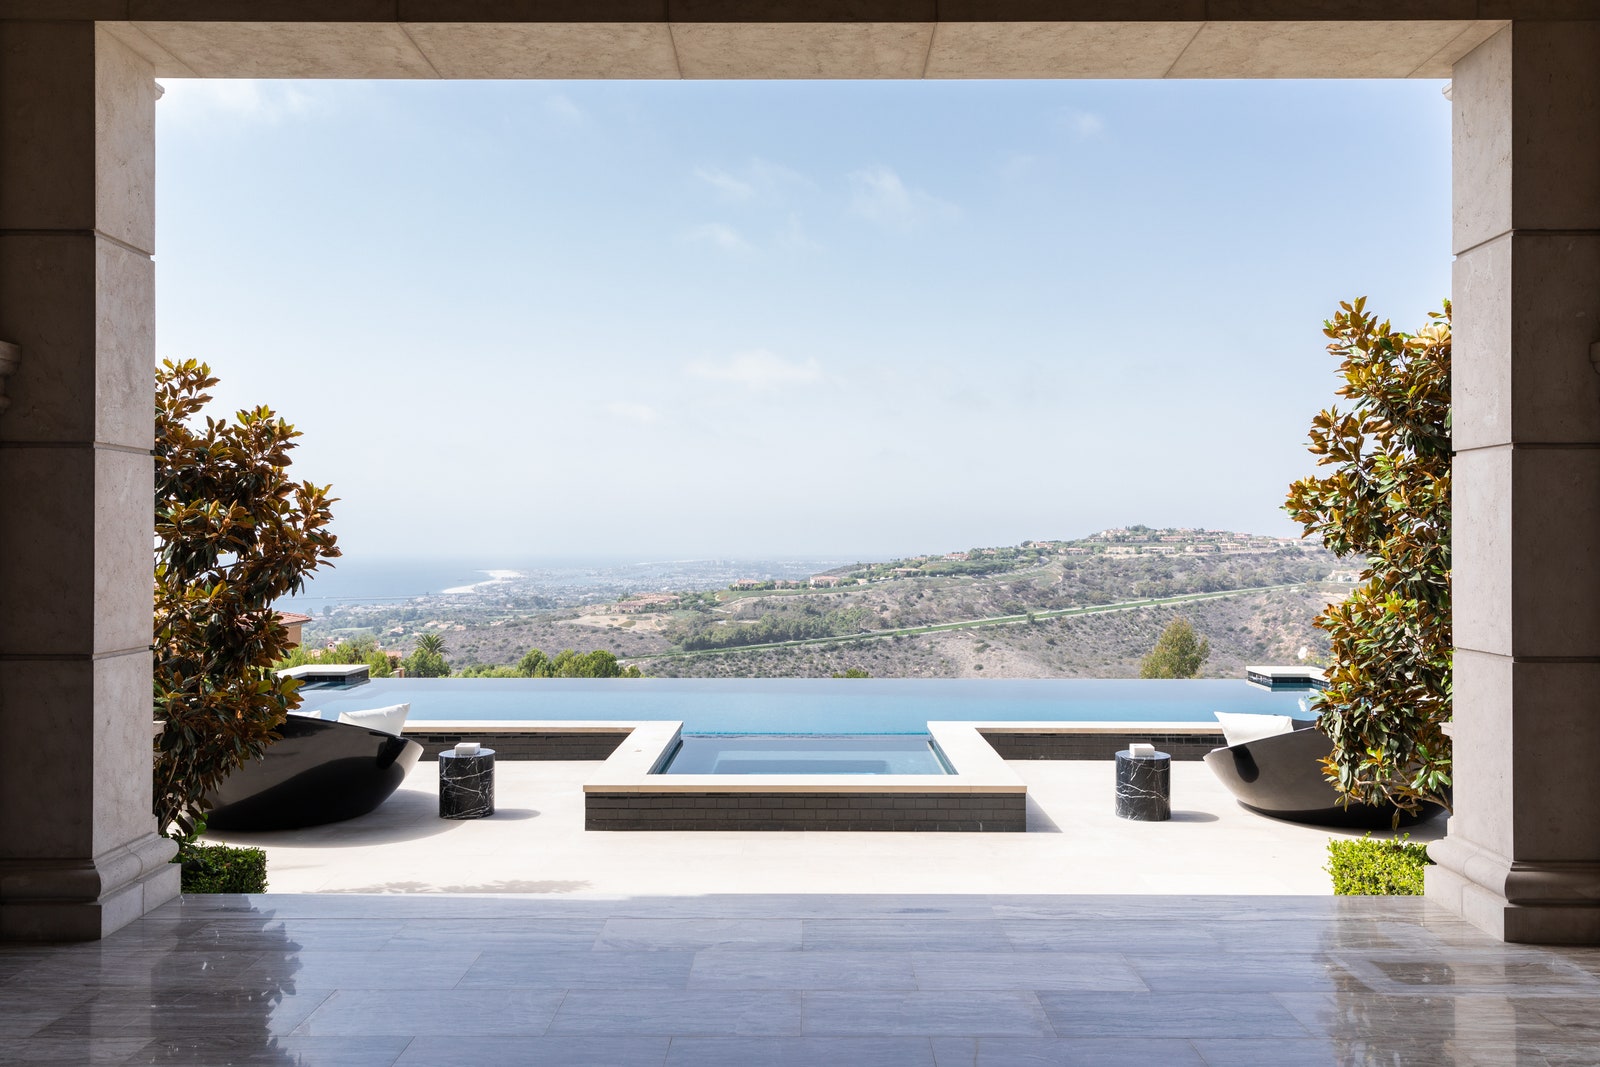 Stone floors large rectangular opening in wall framing a pool with views of the Orange County vista